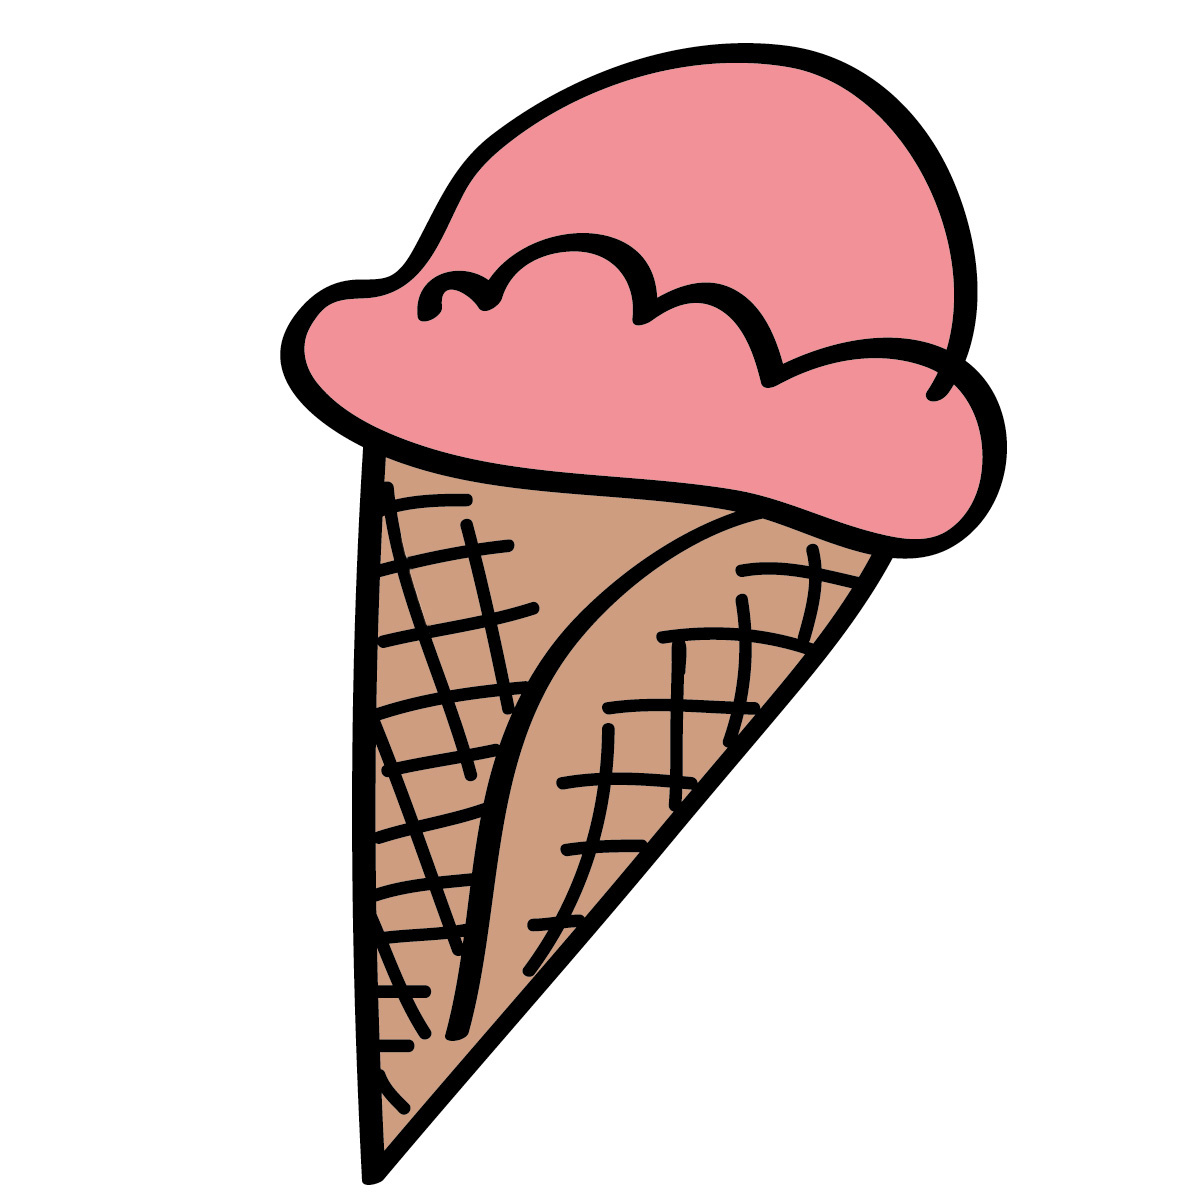 15 Ice Cream Social Clip Art Free Cliparts That You Can Download To